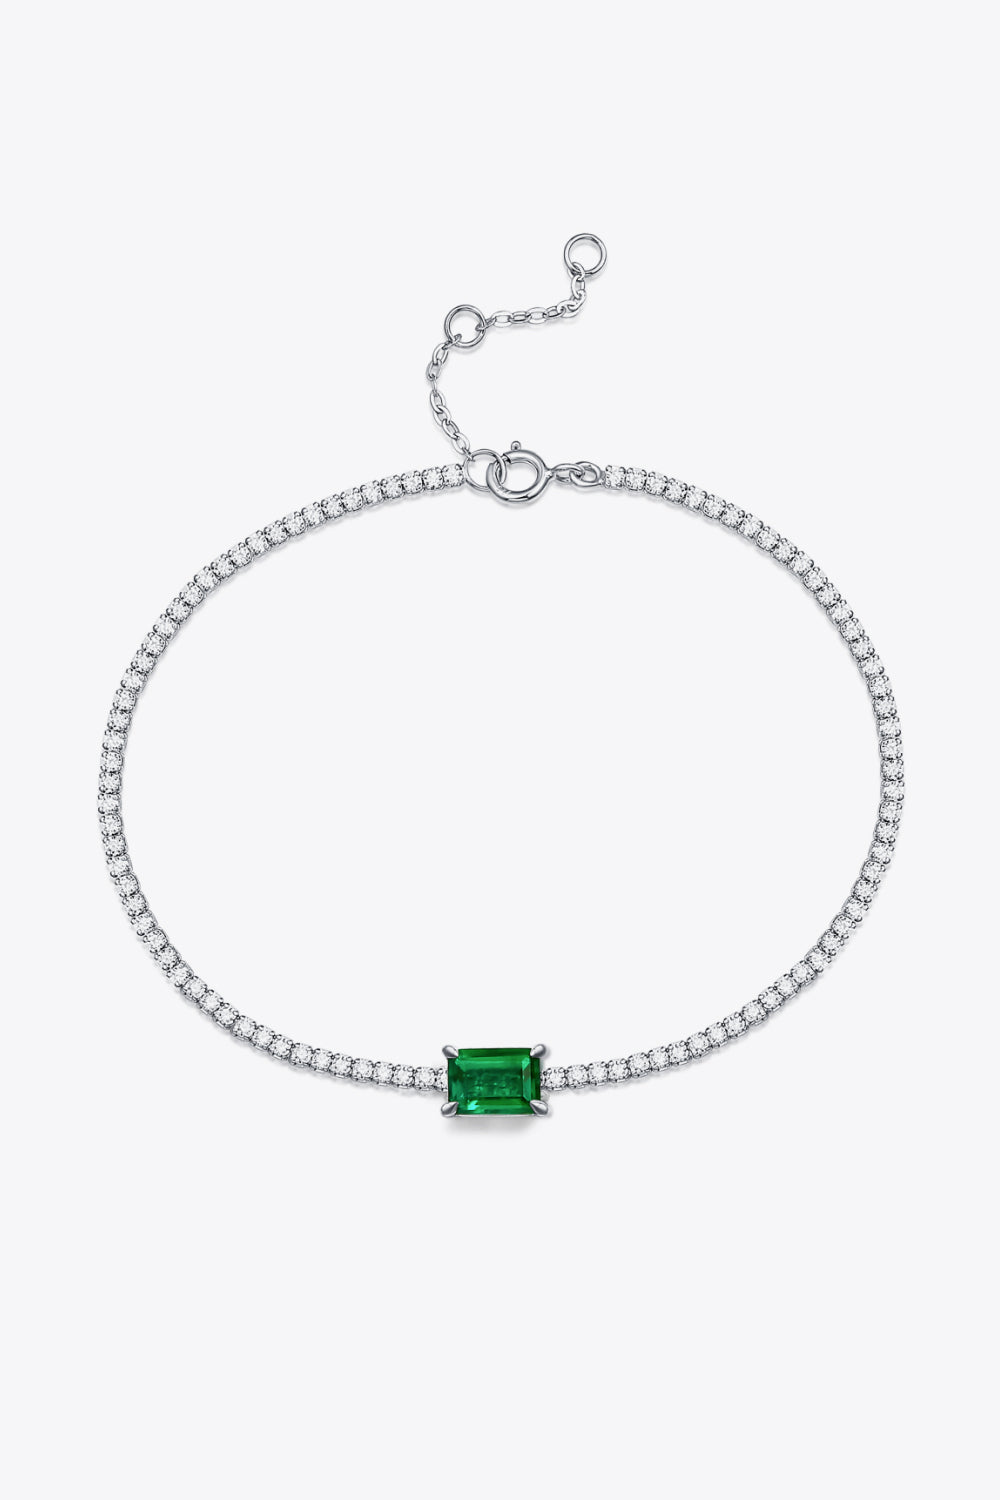 Adored 1 Carat Lab-Grown Emerald Bracelet - Kawaii Stop - Adjustable Length, Adored, Bracelet, Bracelets, Elegant Accessories, Emerald Bracelet, Gift for Her, Jewelry for Women, Lab-Grown Gemstone, Luxury Fashion, Ship From Overseas, Shipping Delay 09/29/2023 - 10/04/2023, Sparkling Zircon, Sterling Silver Jewelry, Timeless Elegance